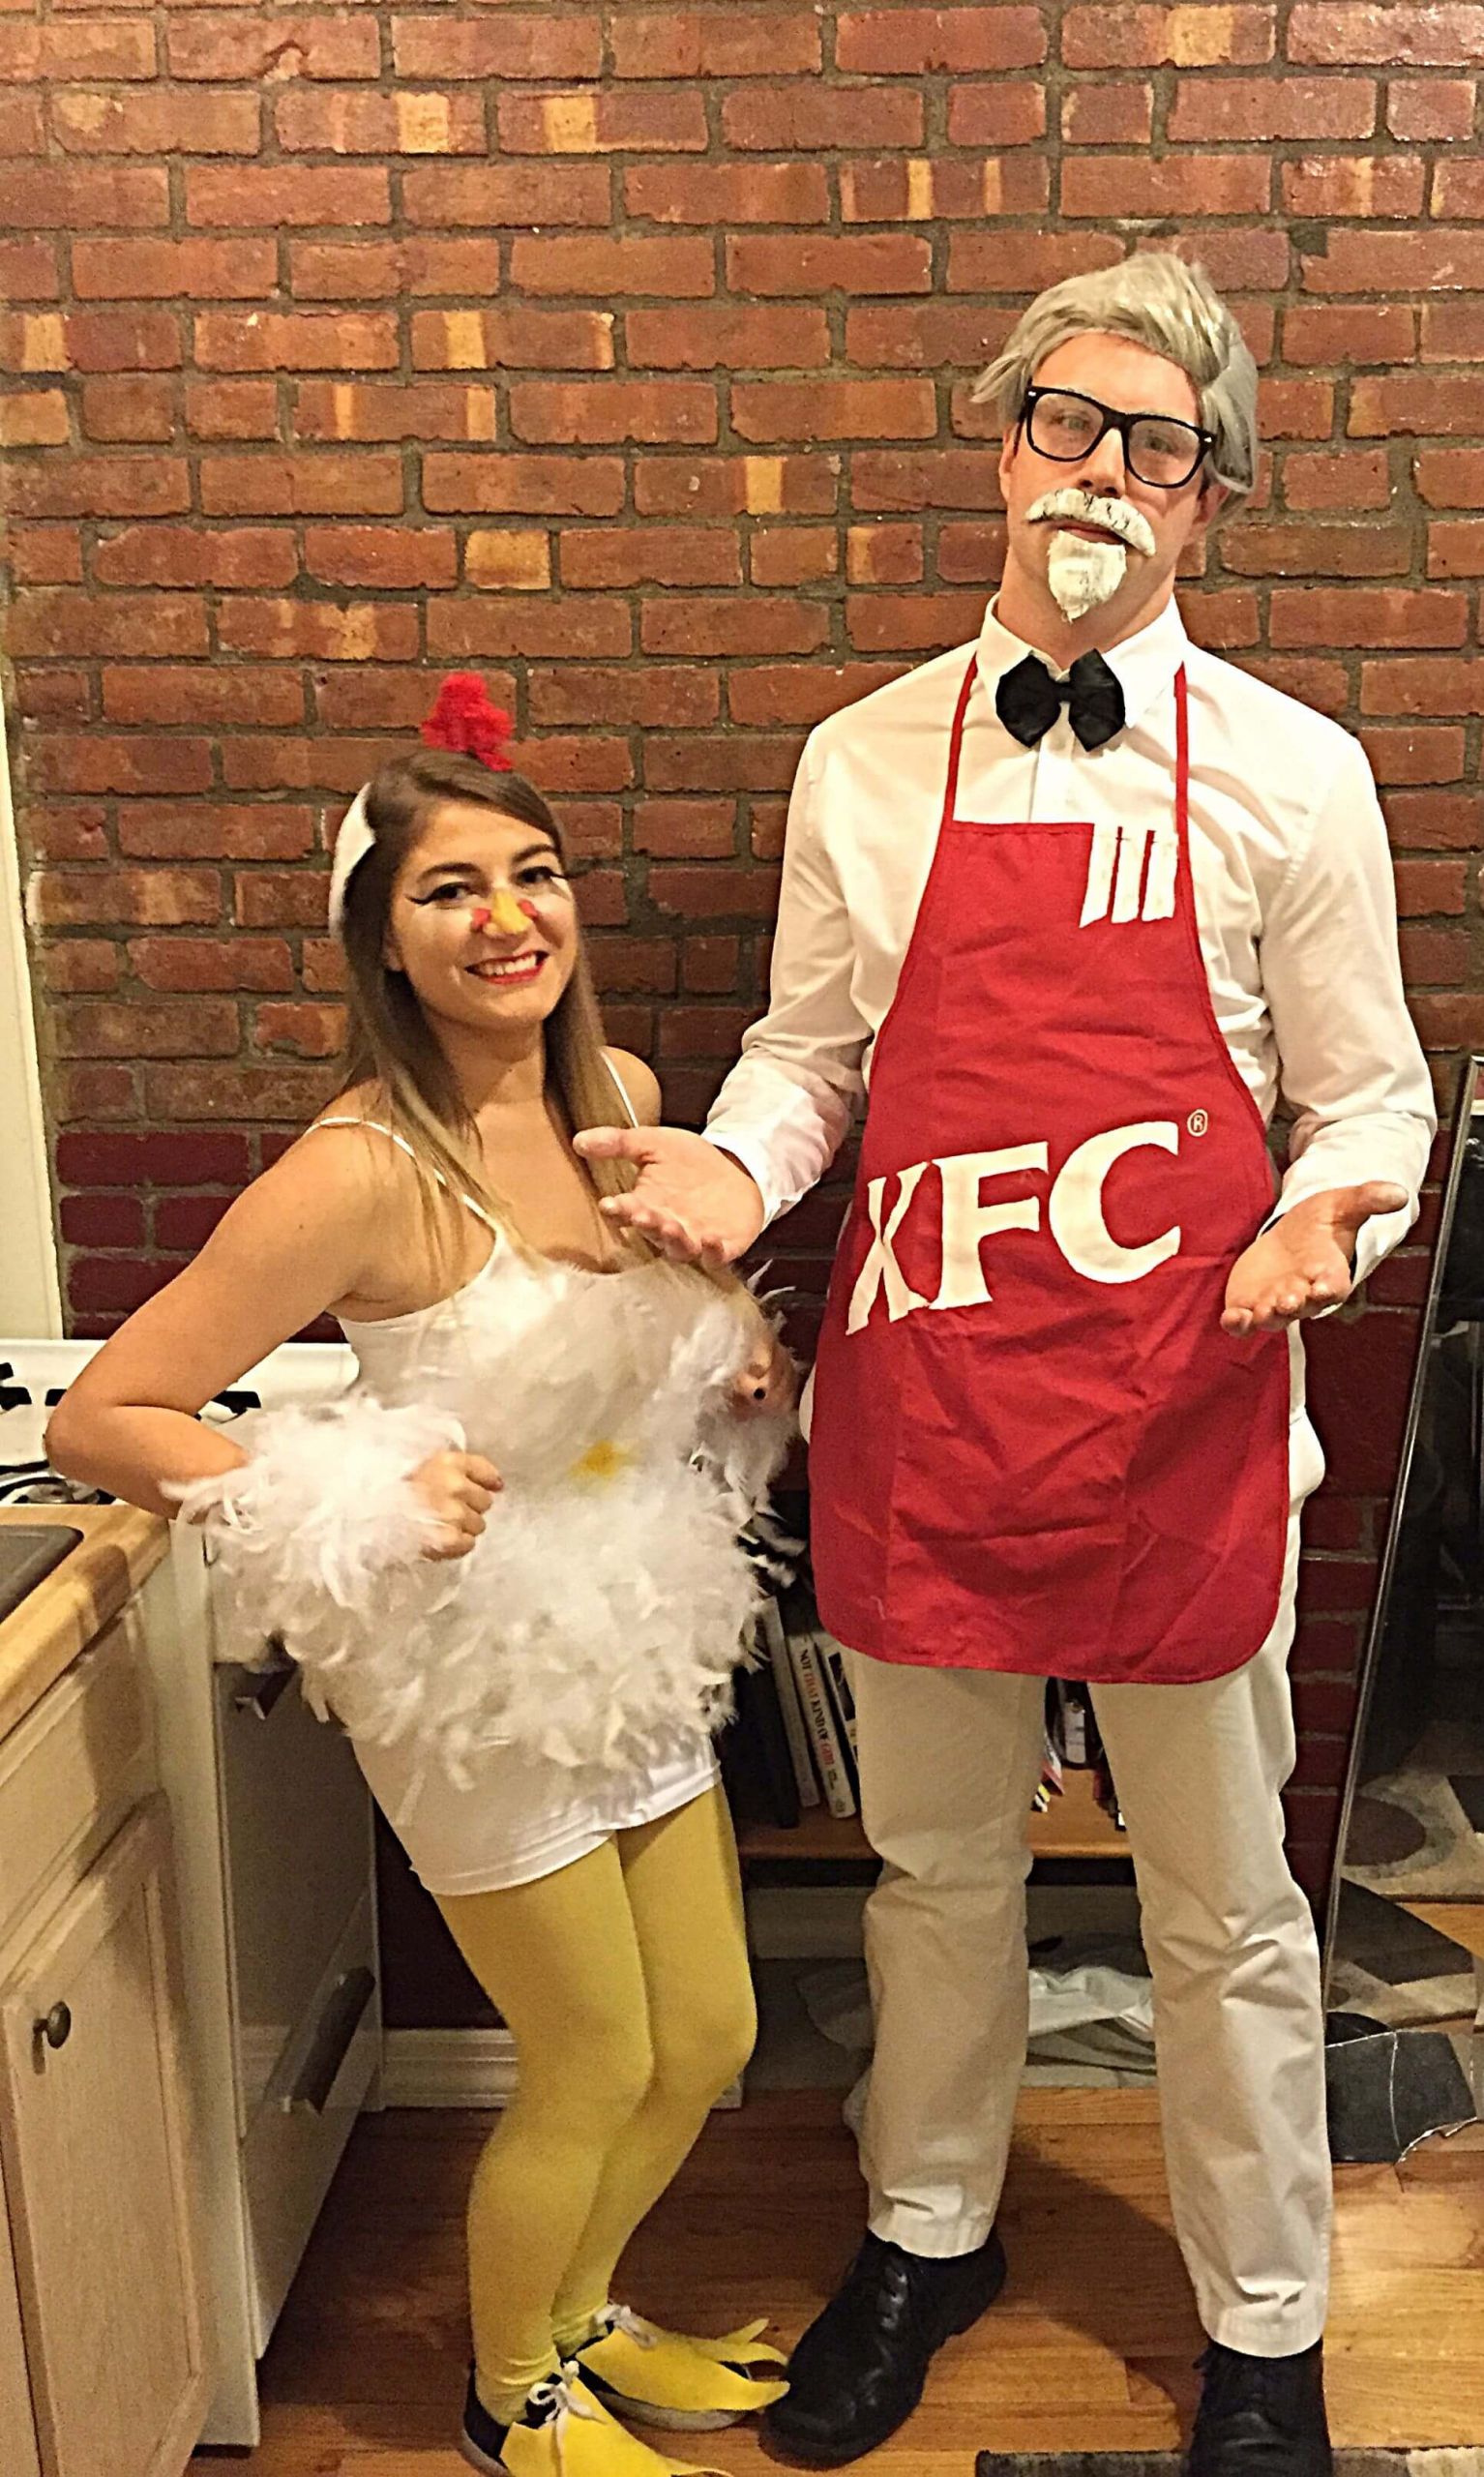 Funny DIY Couples Costumes
 67 Halloween Costumes for Couples That are Funny And Spooky